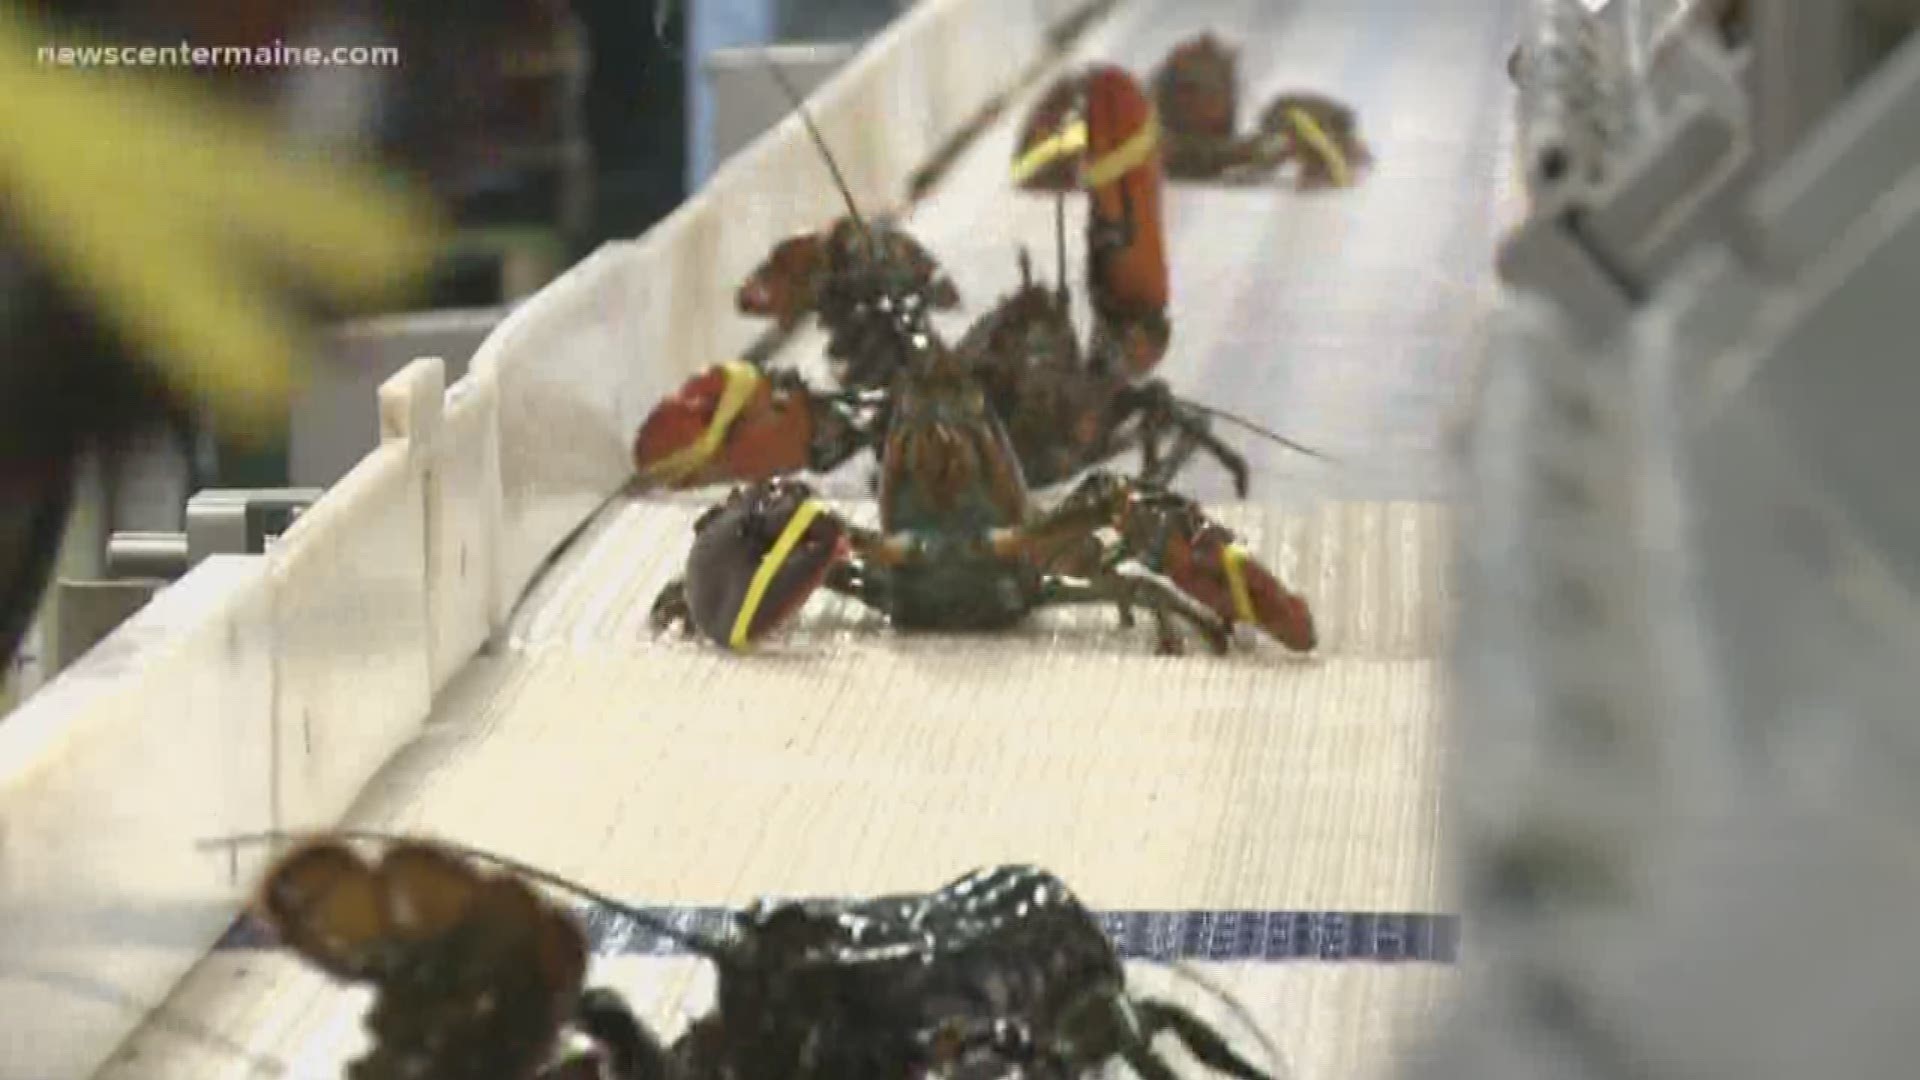 Tariffs affecting lobster business in Maine